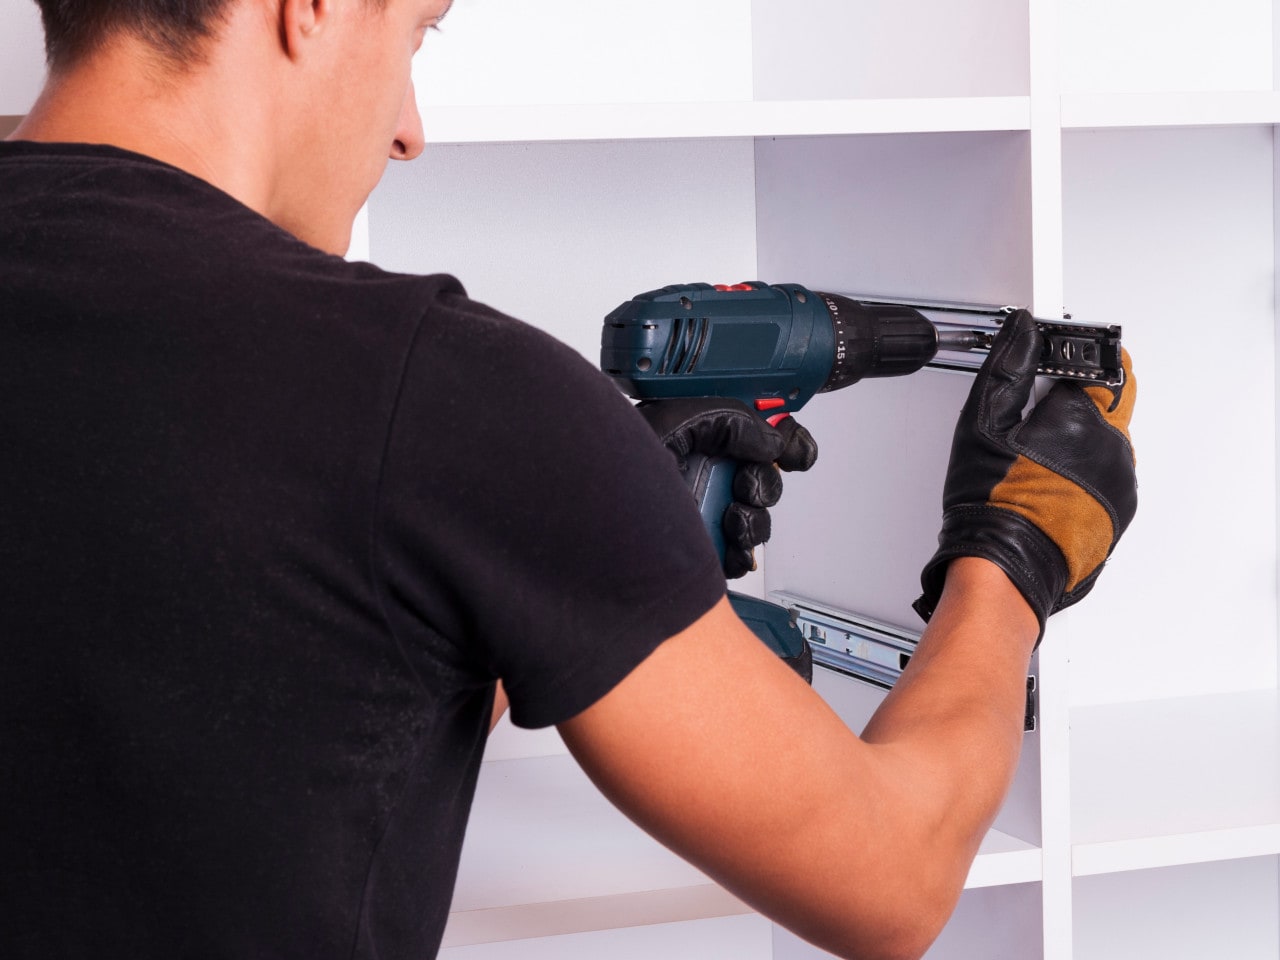 Builder assembling a cabinet with cordless drill